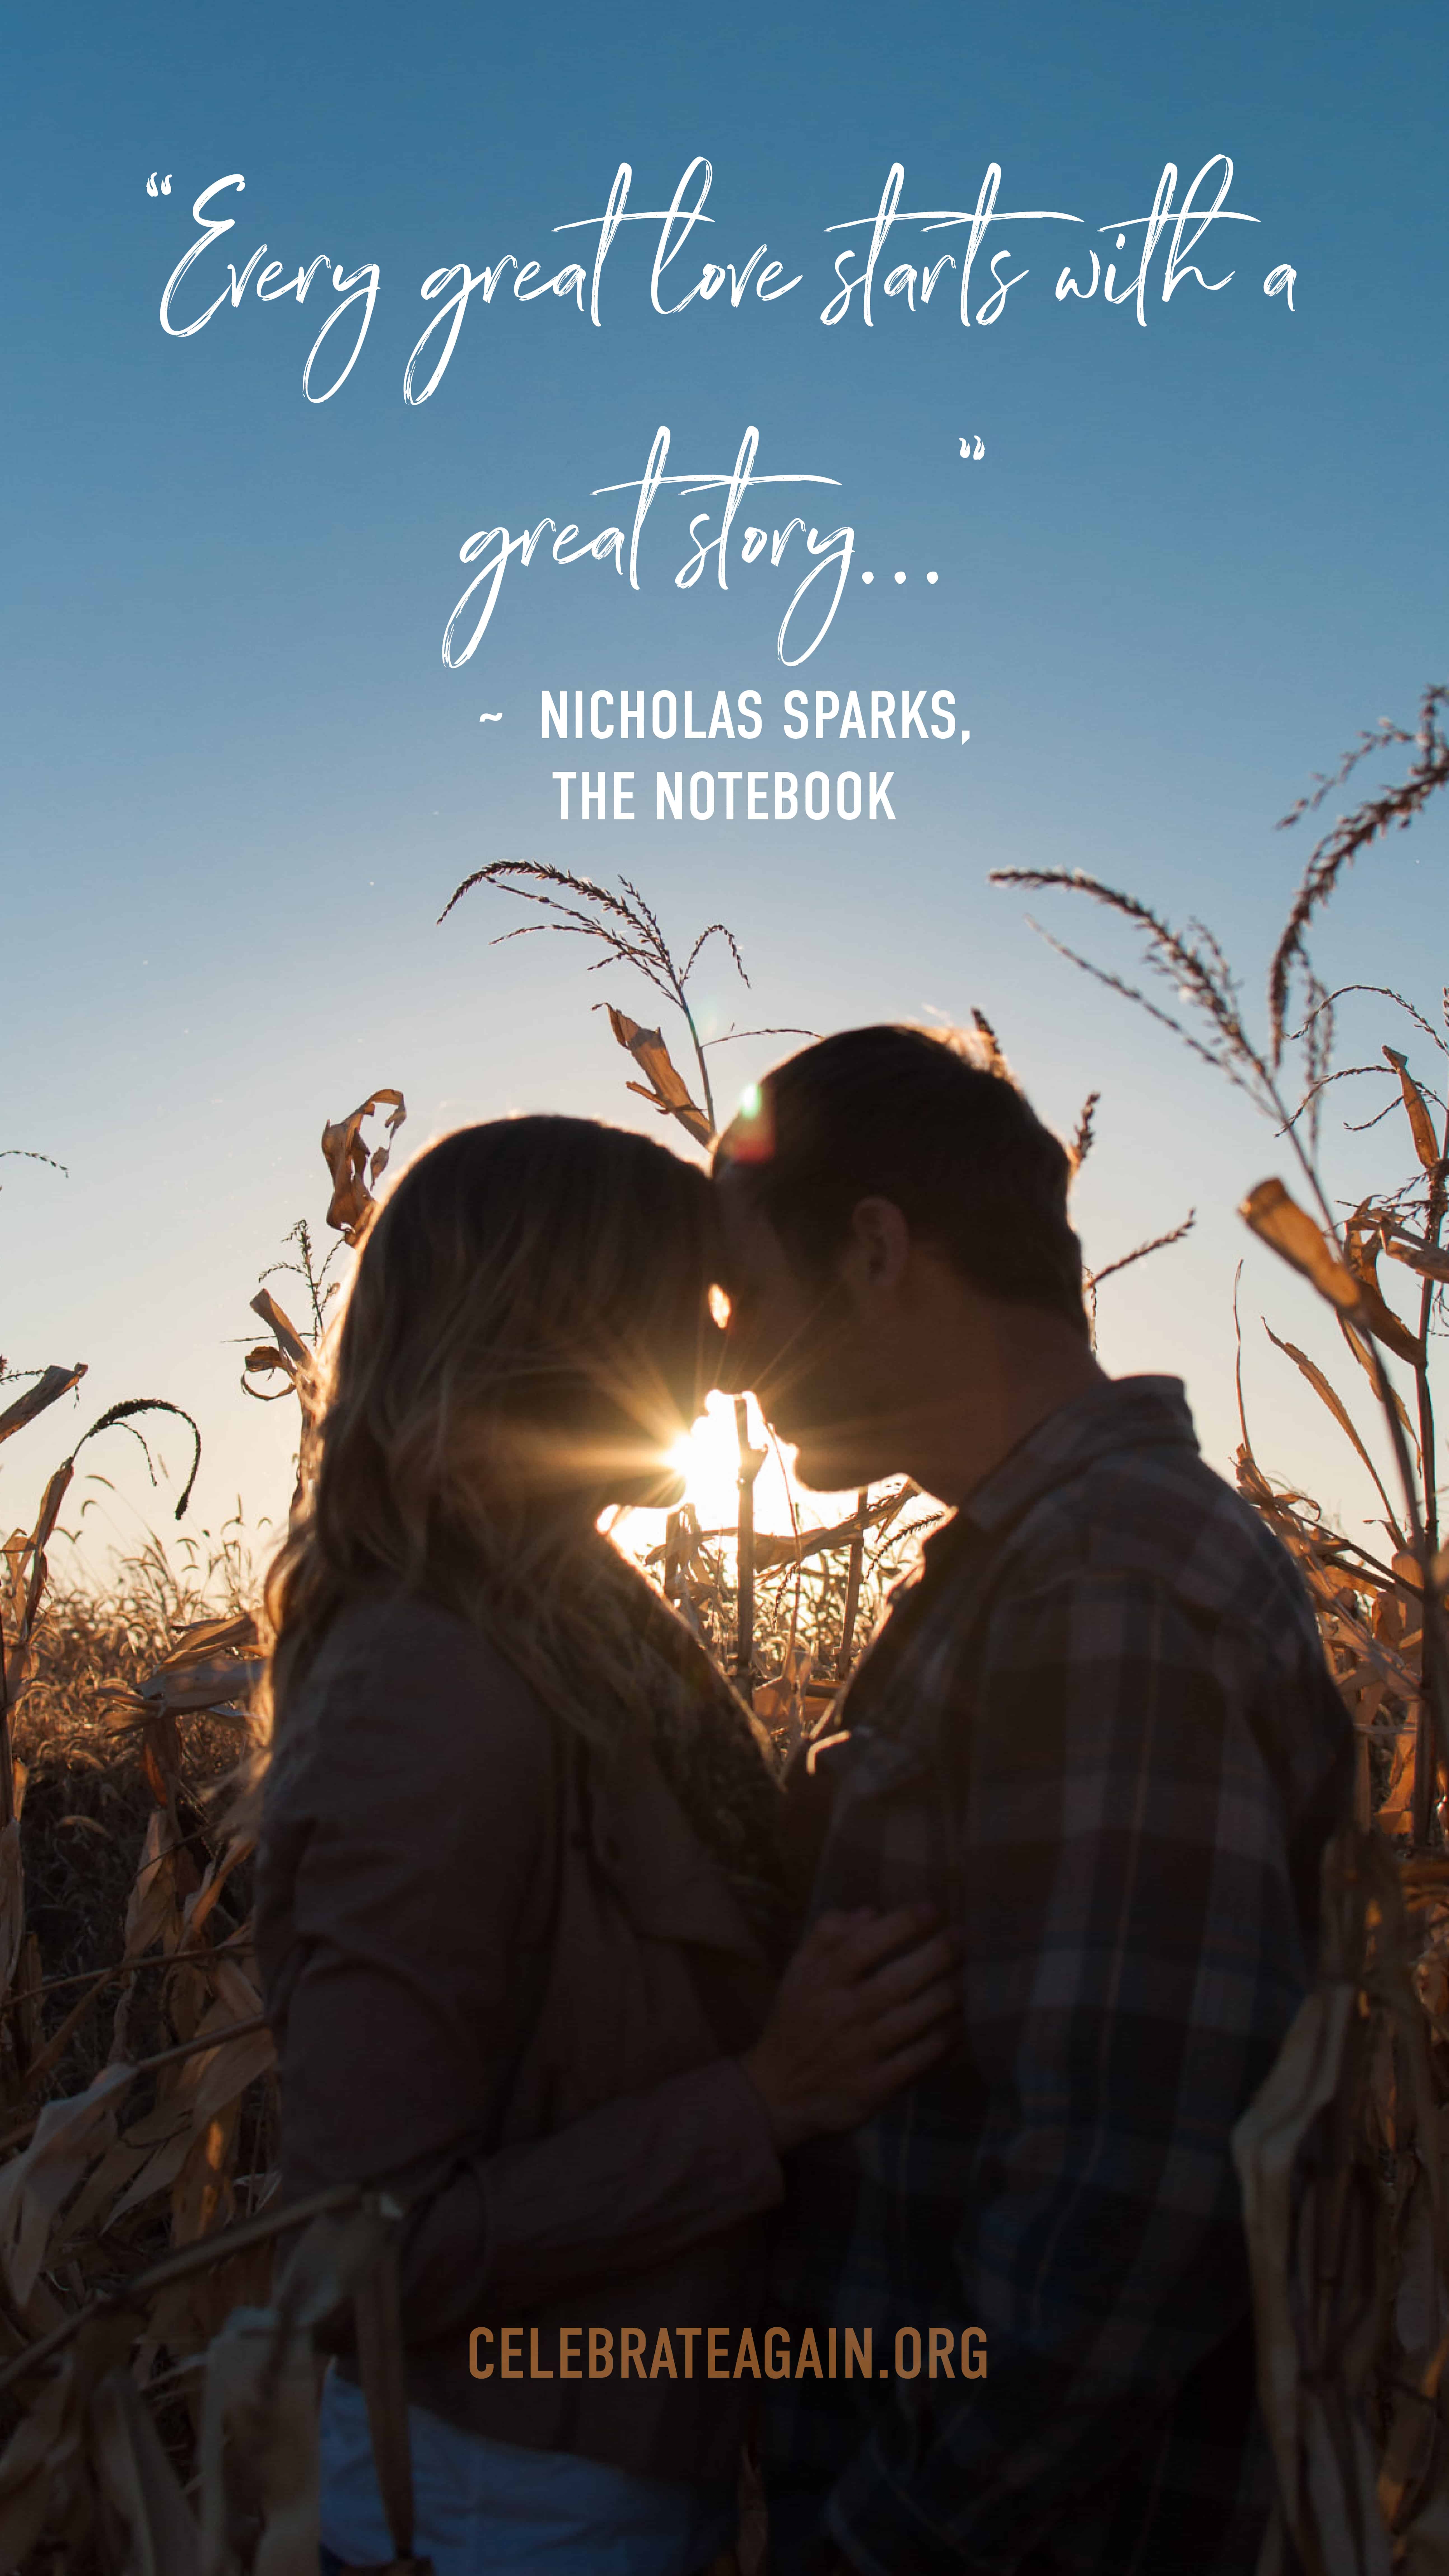 “Every great love starts with a great story...” ― Nicholas Sparks, The Notebook couple resting foreheads together in a farm as the sun glows around them image by celebrateagain.org